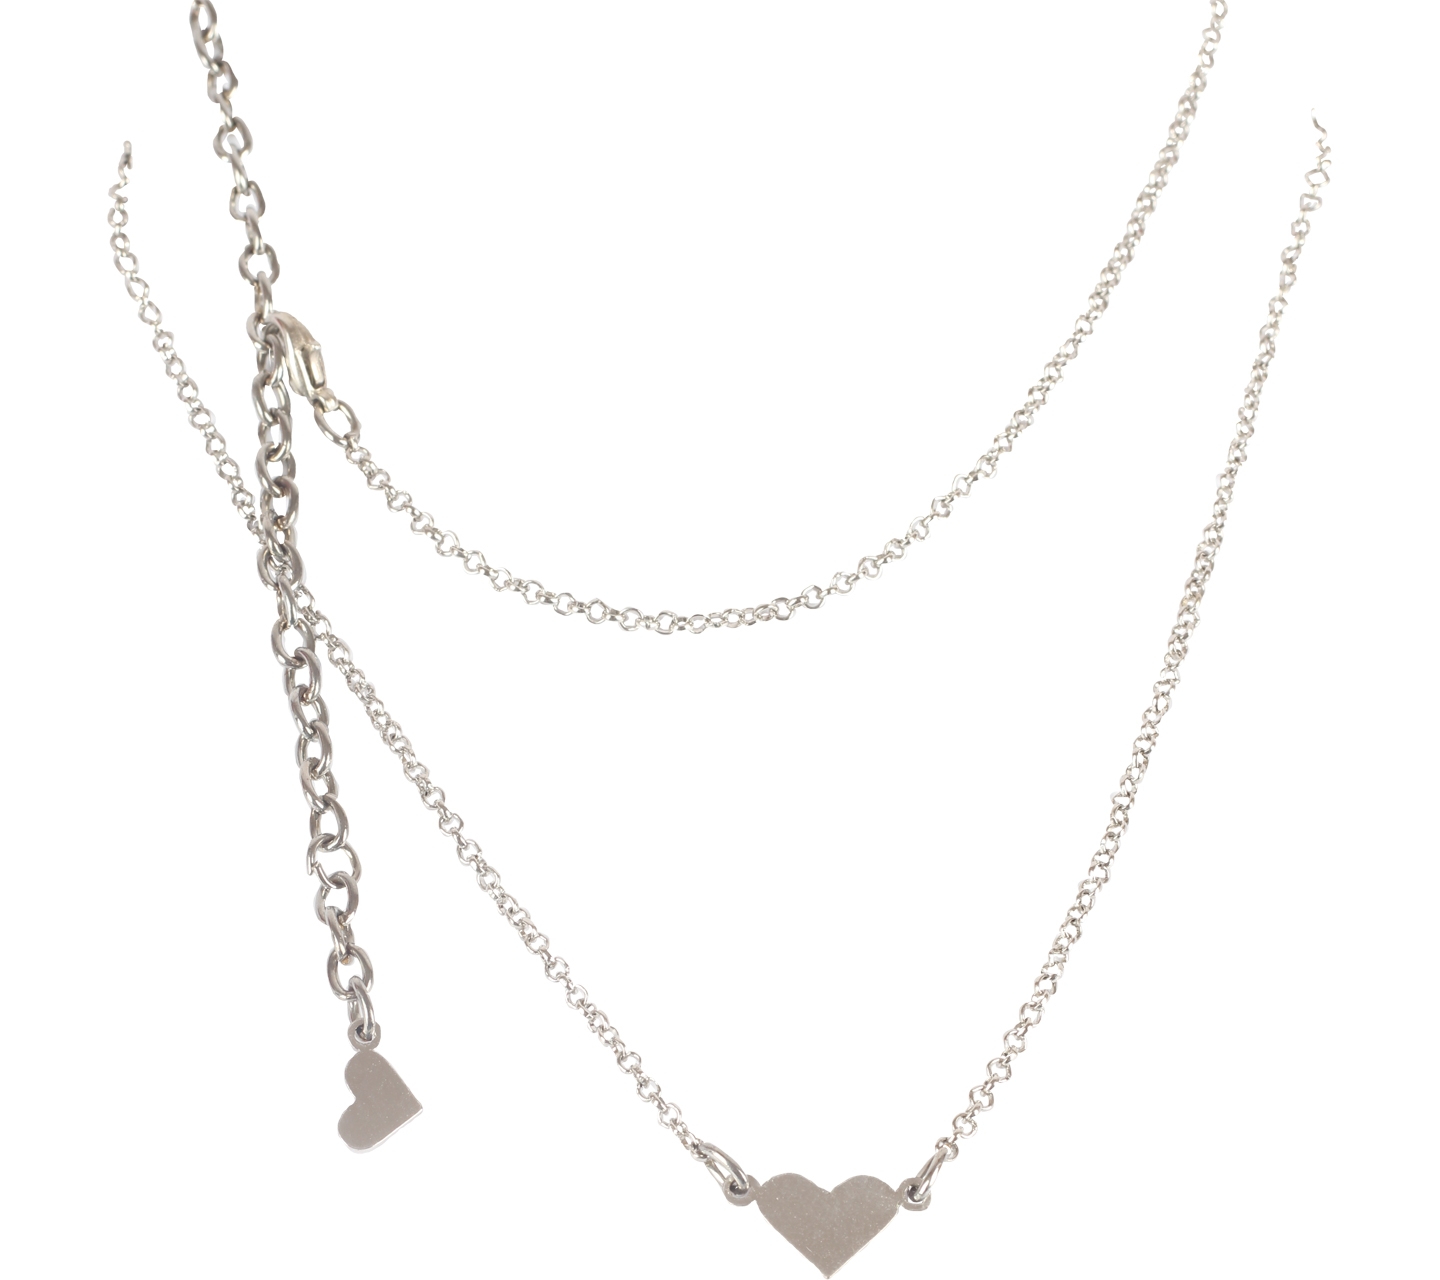 Krom Collective White Gold Love Necklace Jewellery